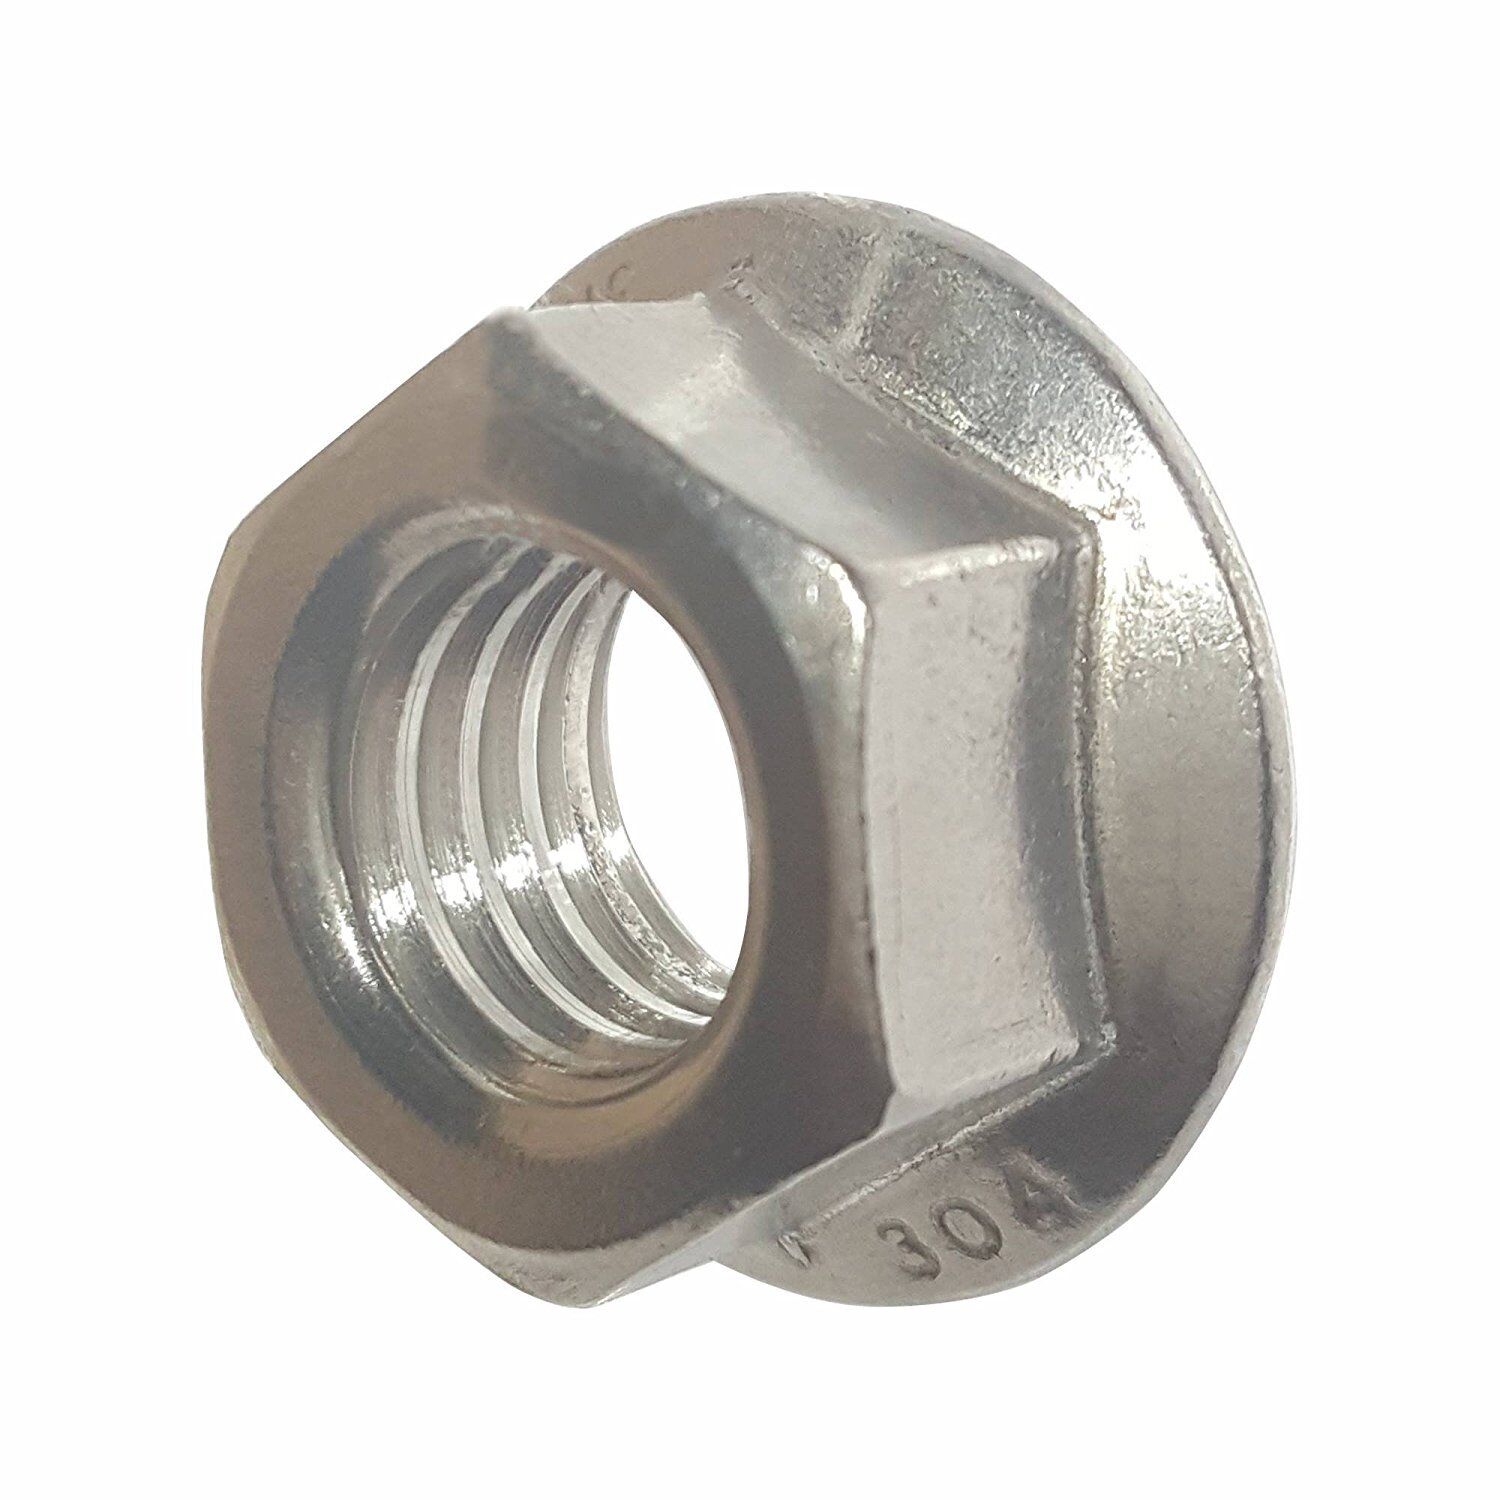 5/16-18 Stainless Steel Flange Nuts Serrated Base Lock Anti Vibration Qty 50